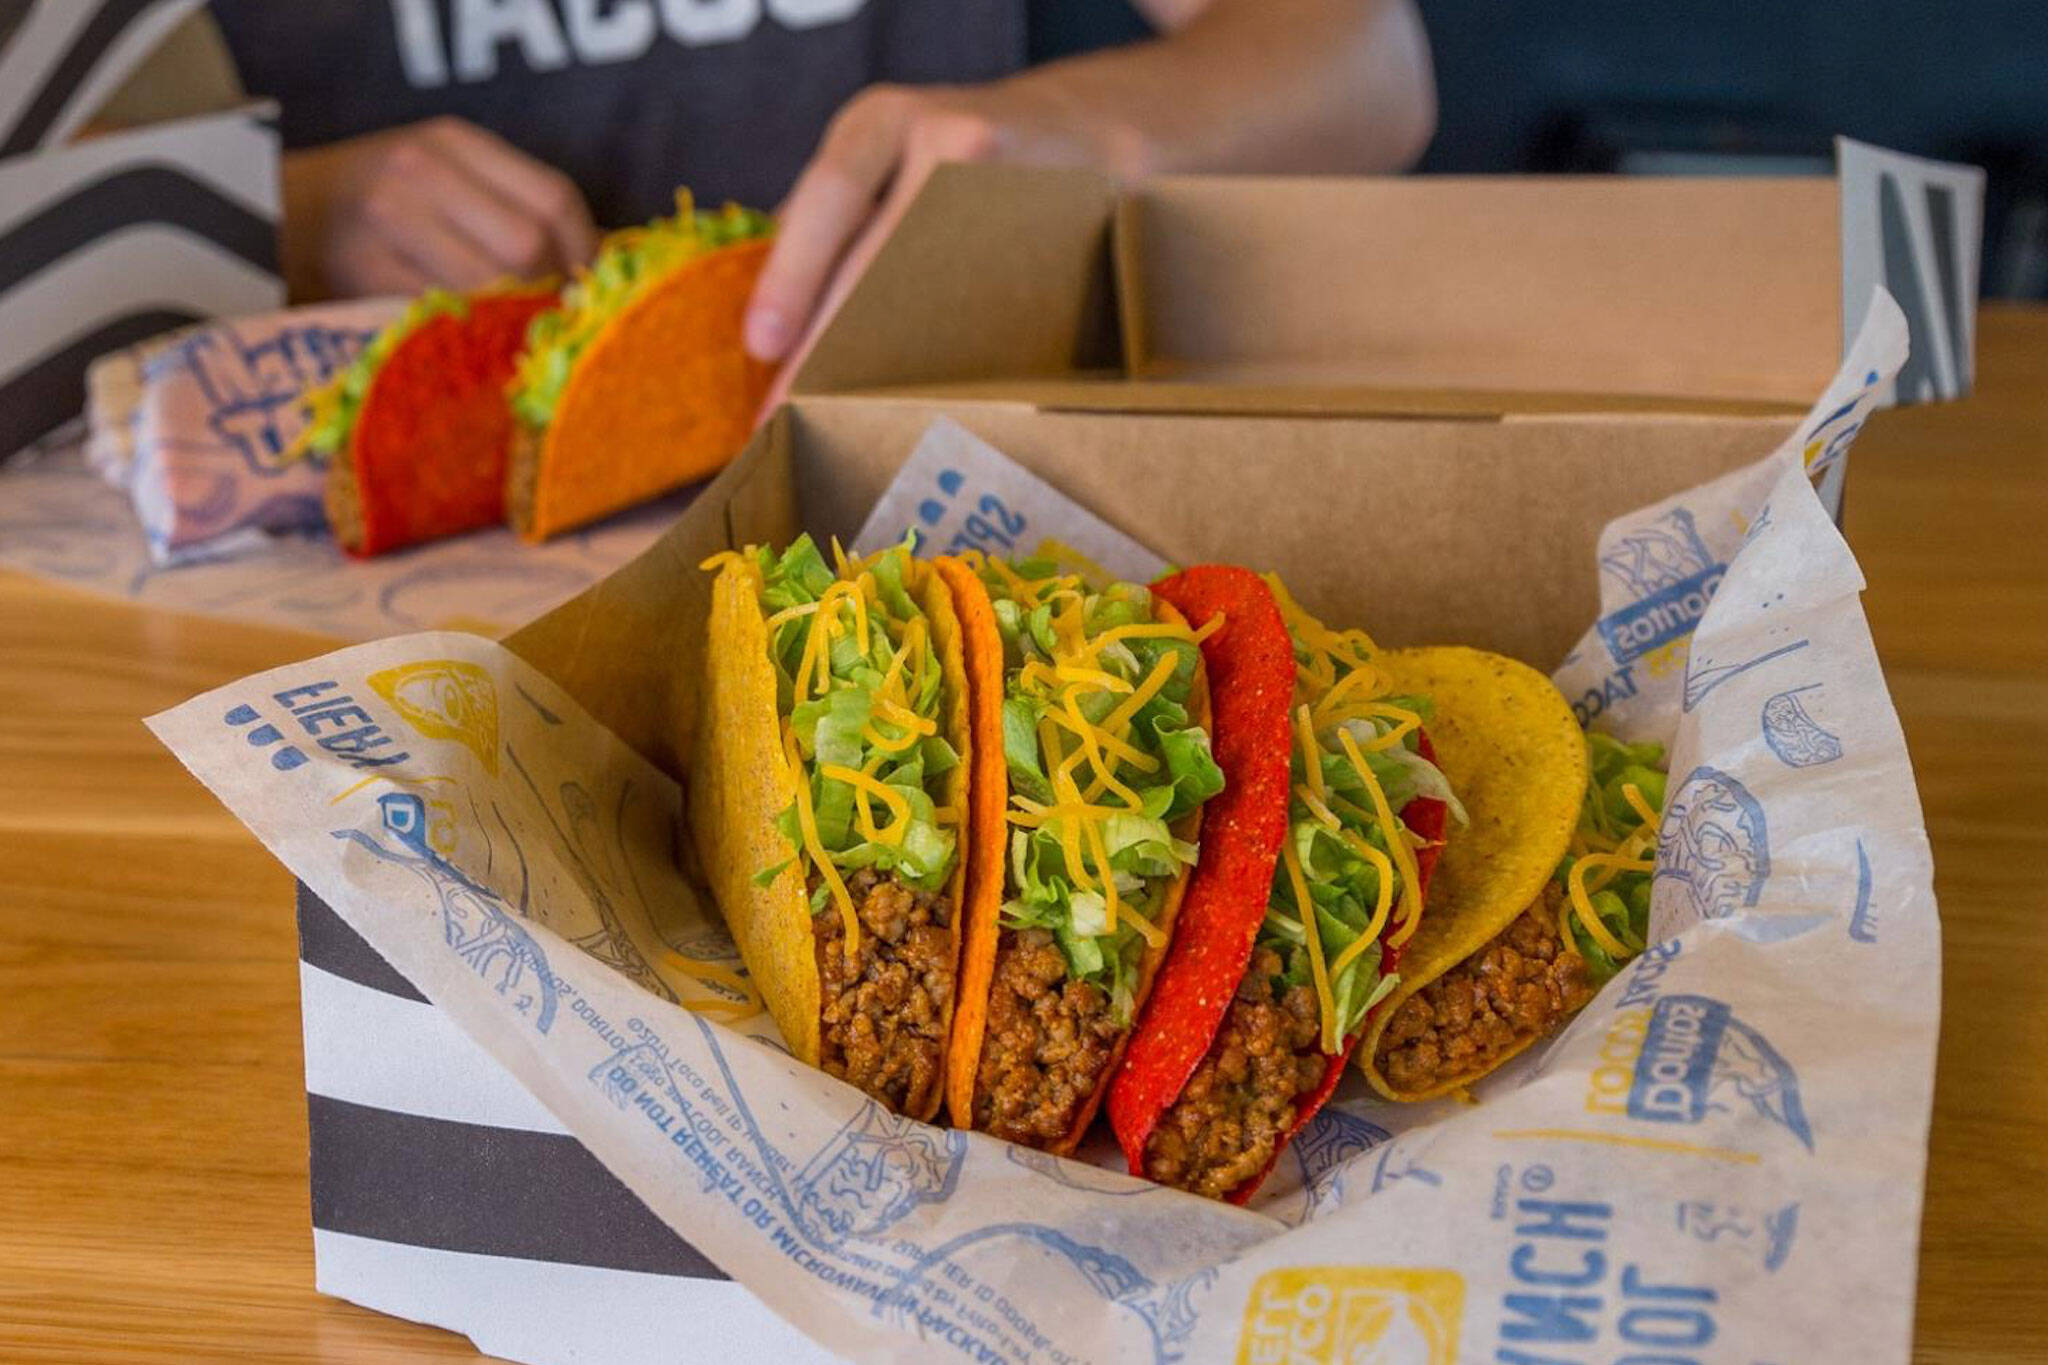 Taco Bell is giving away free tacos in Canada next week